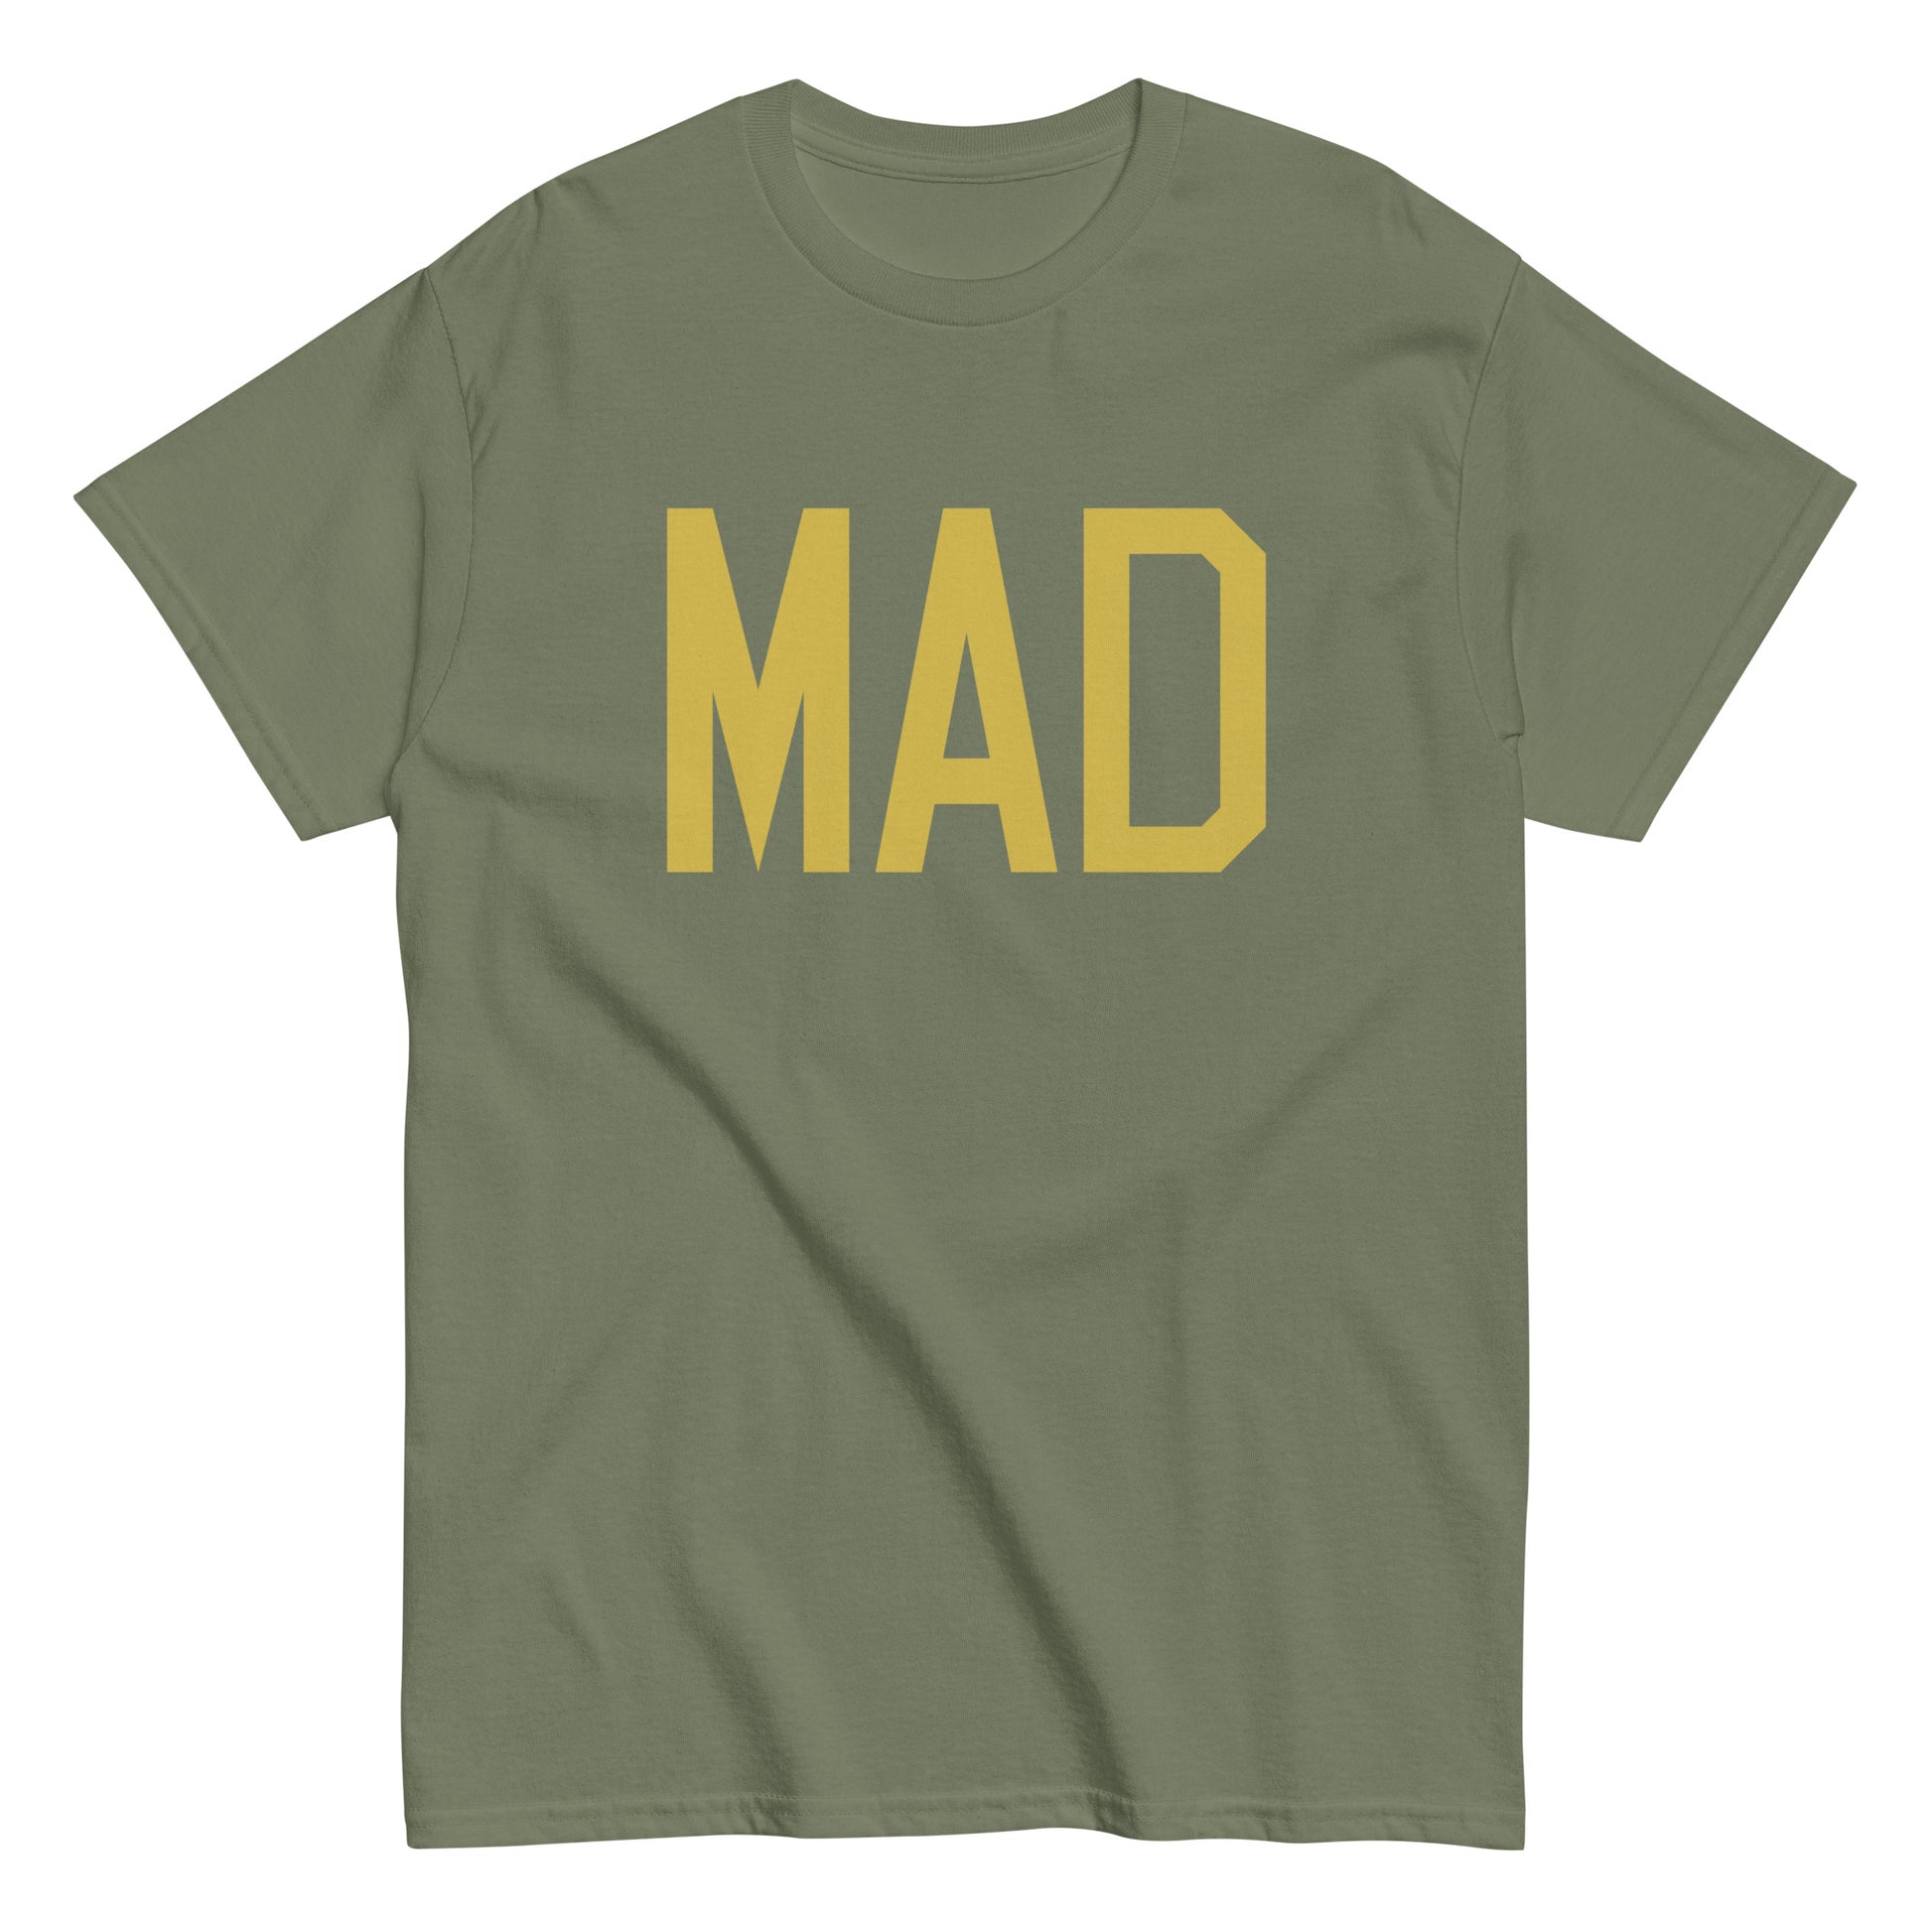 Aviation Enthusiast Men's Tee - Old Gold Graphic • MAD Madrid • YHM Designs - Image 02